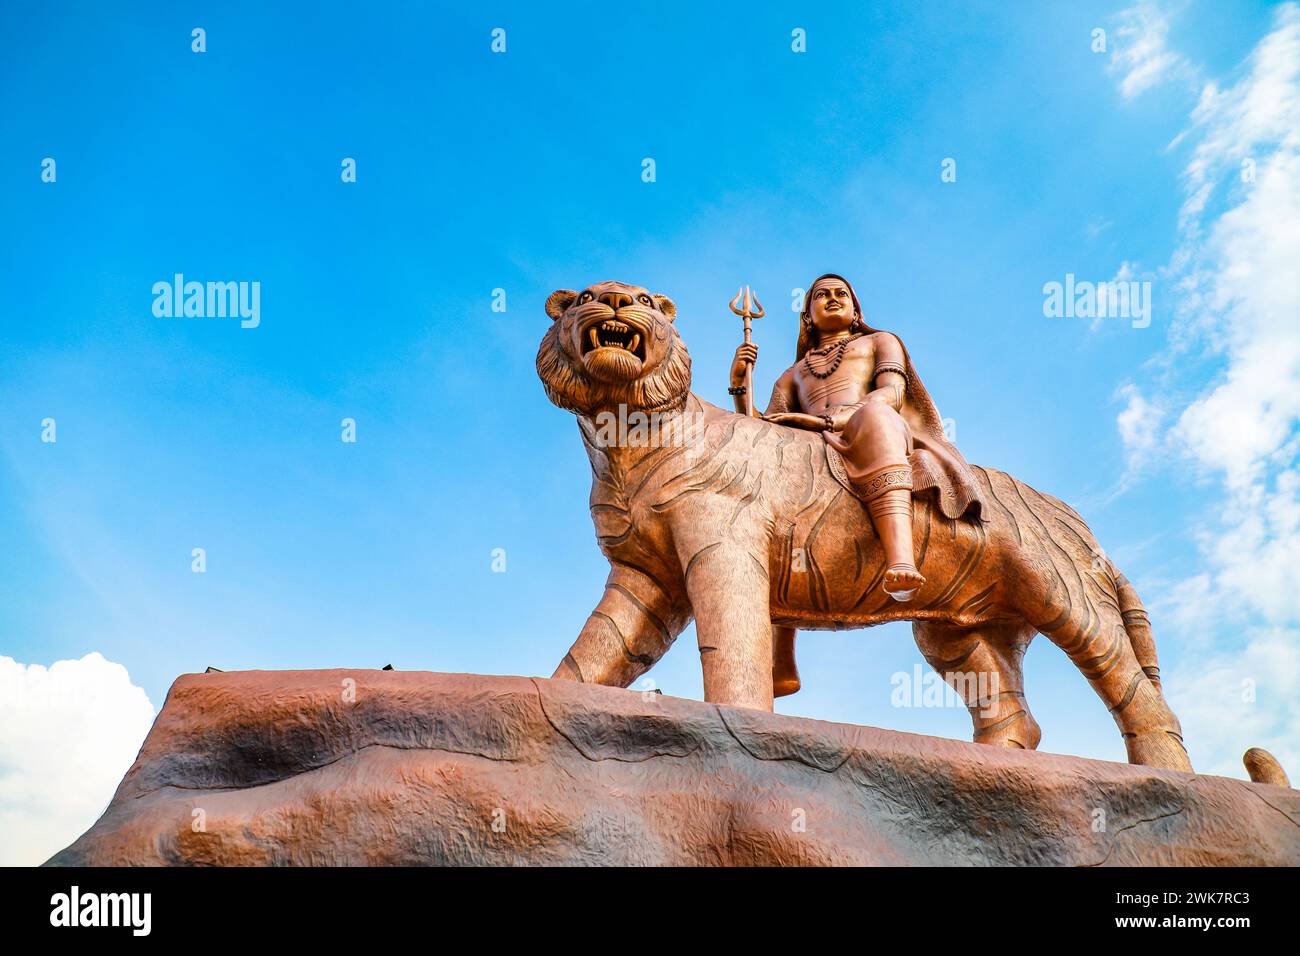 A monumental sculpture of a man on a tiger with a spear in hand Stock Photo